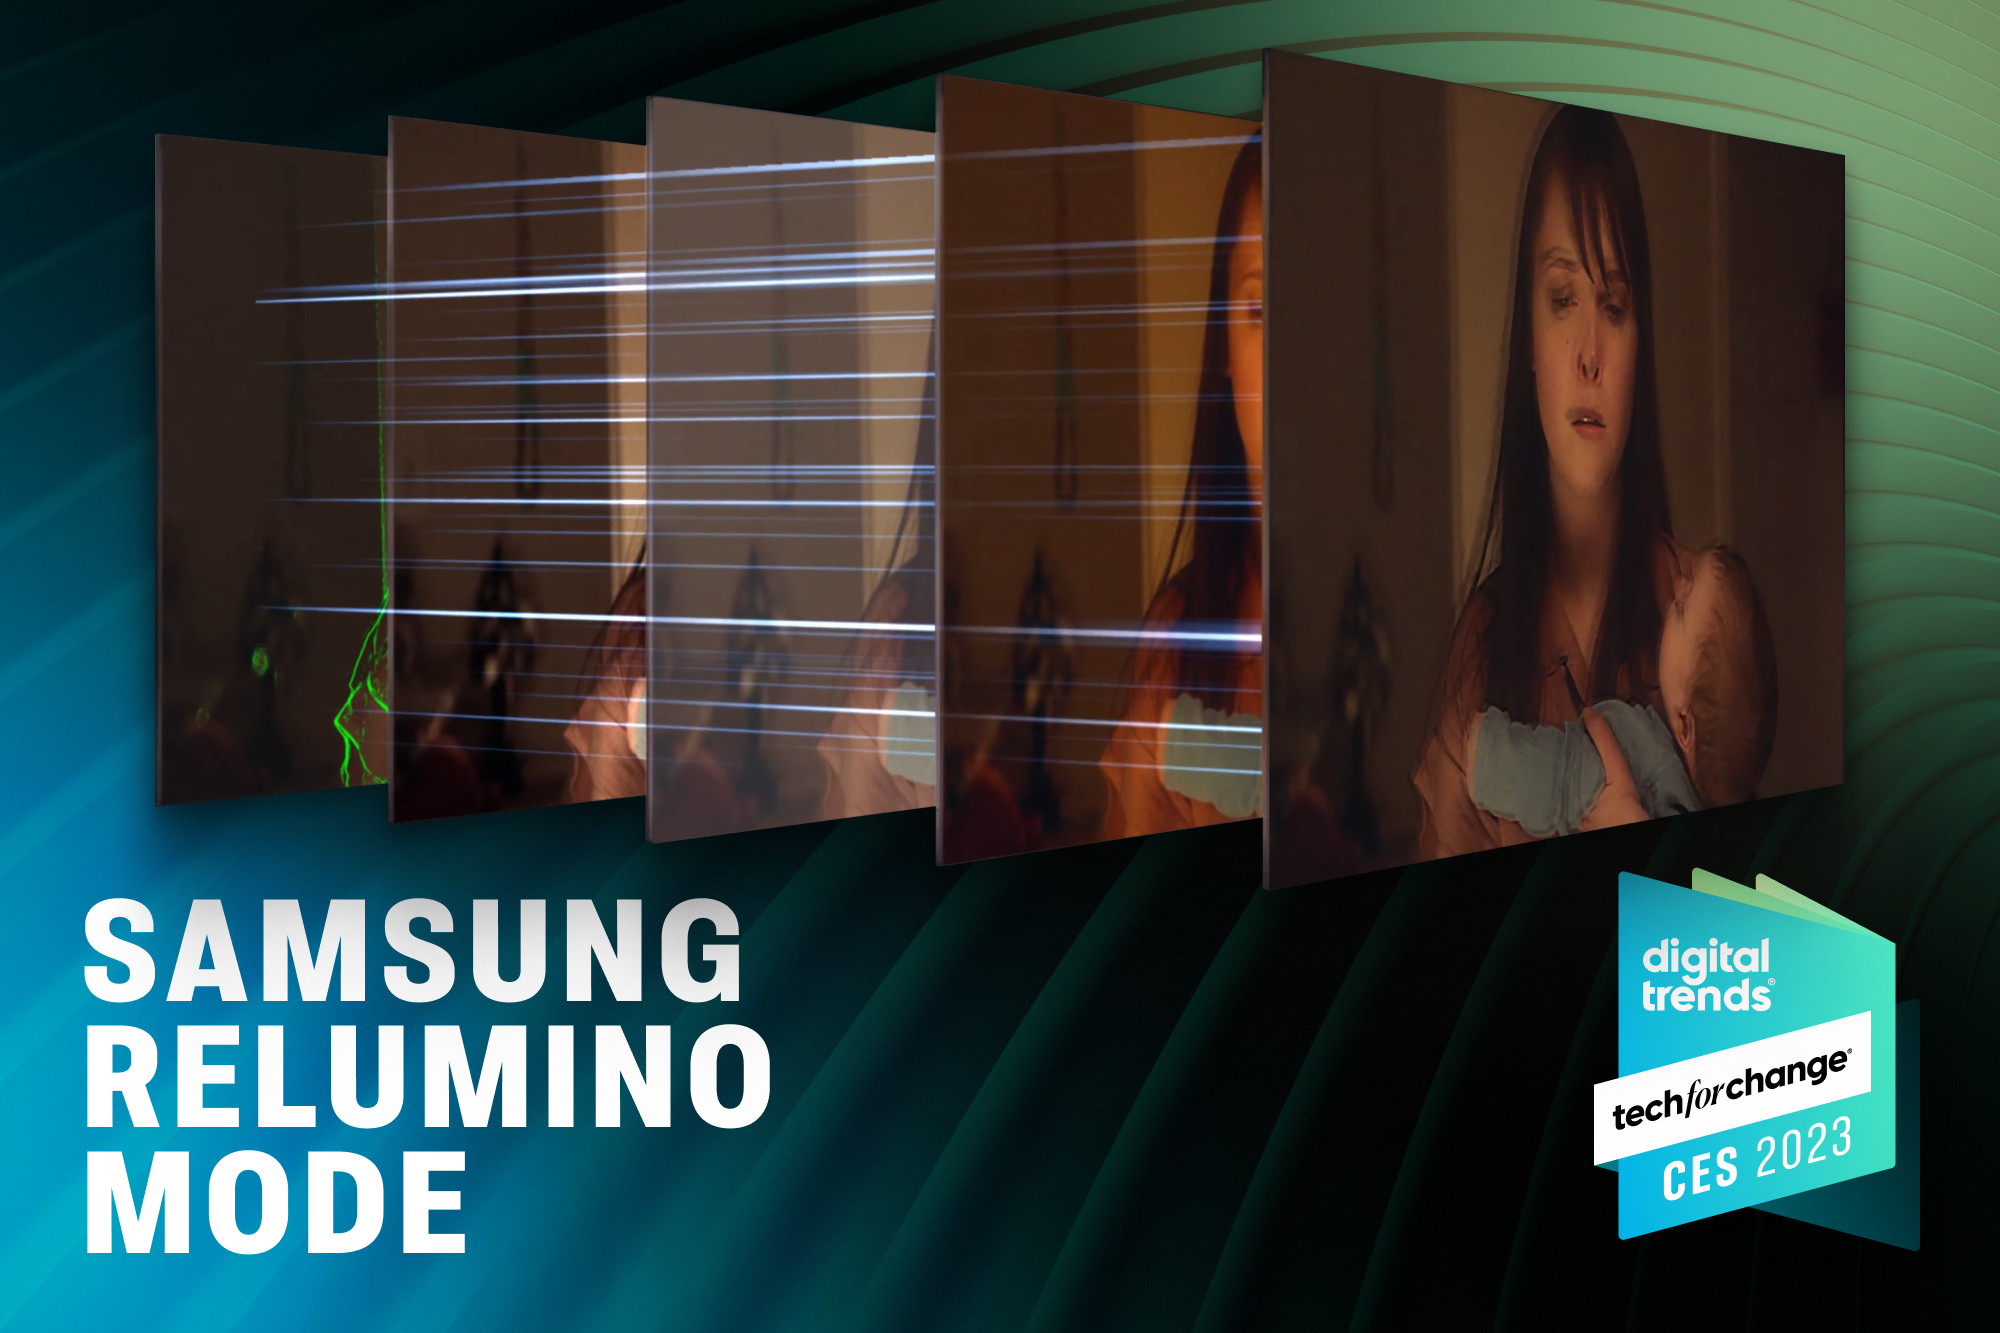 Samsung's Relumino Mode helps those with low vision